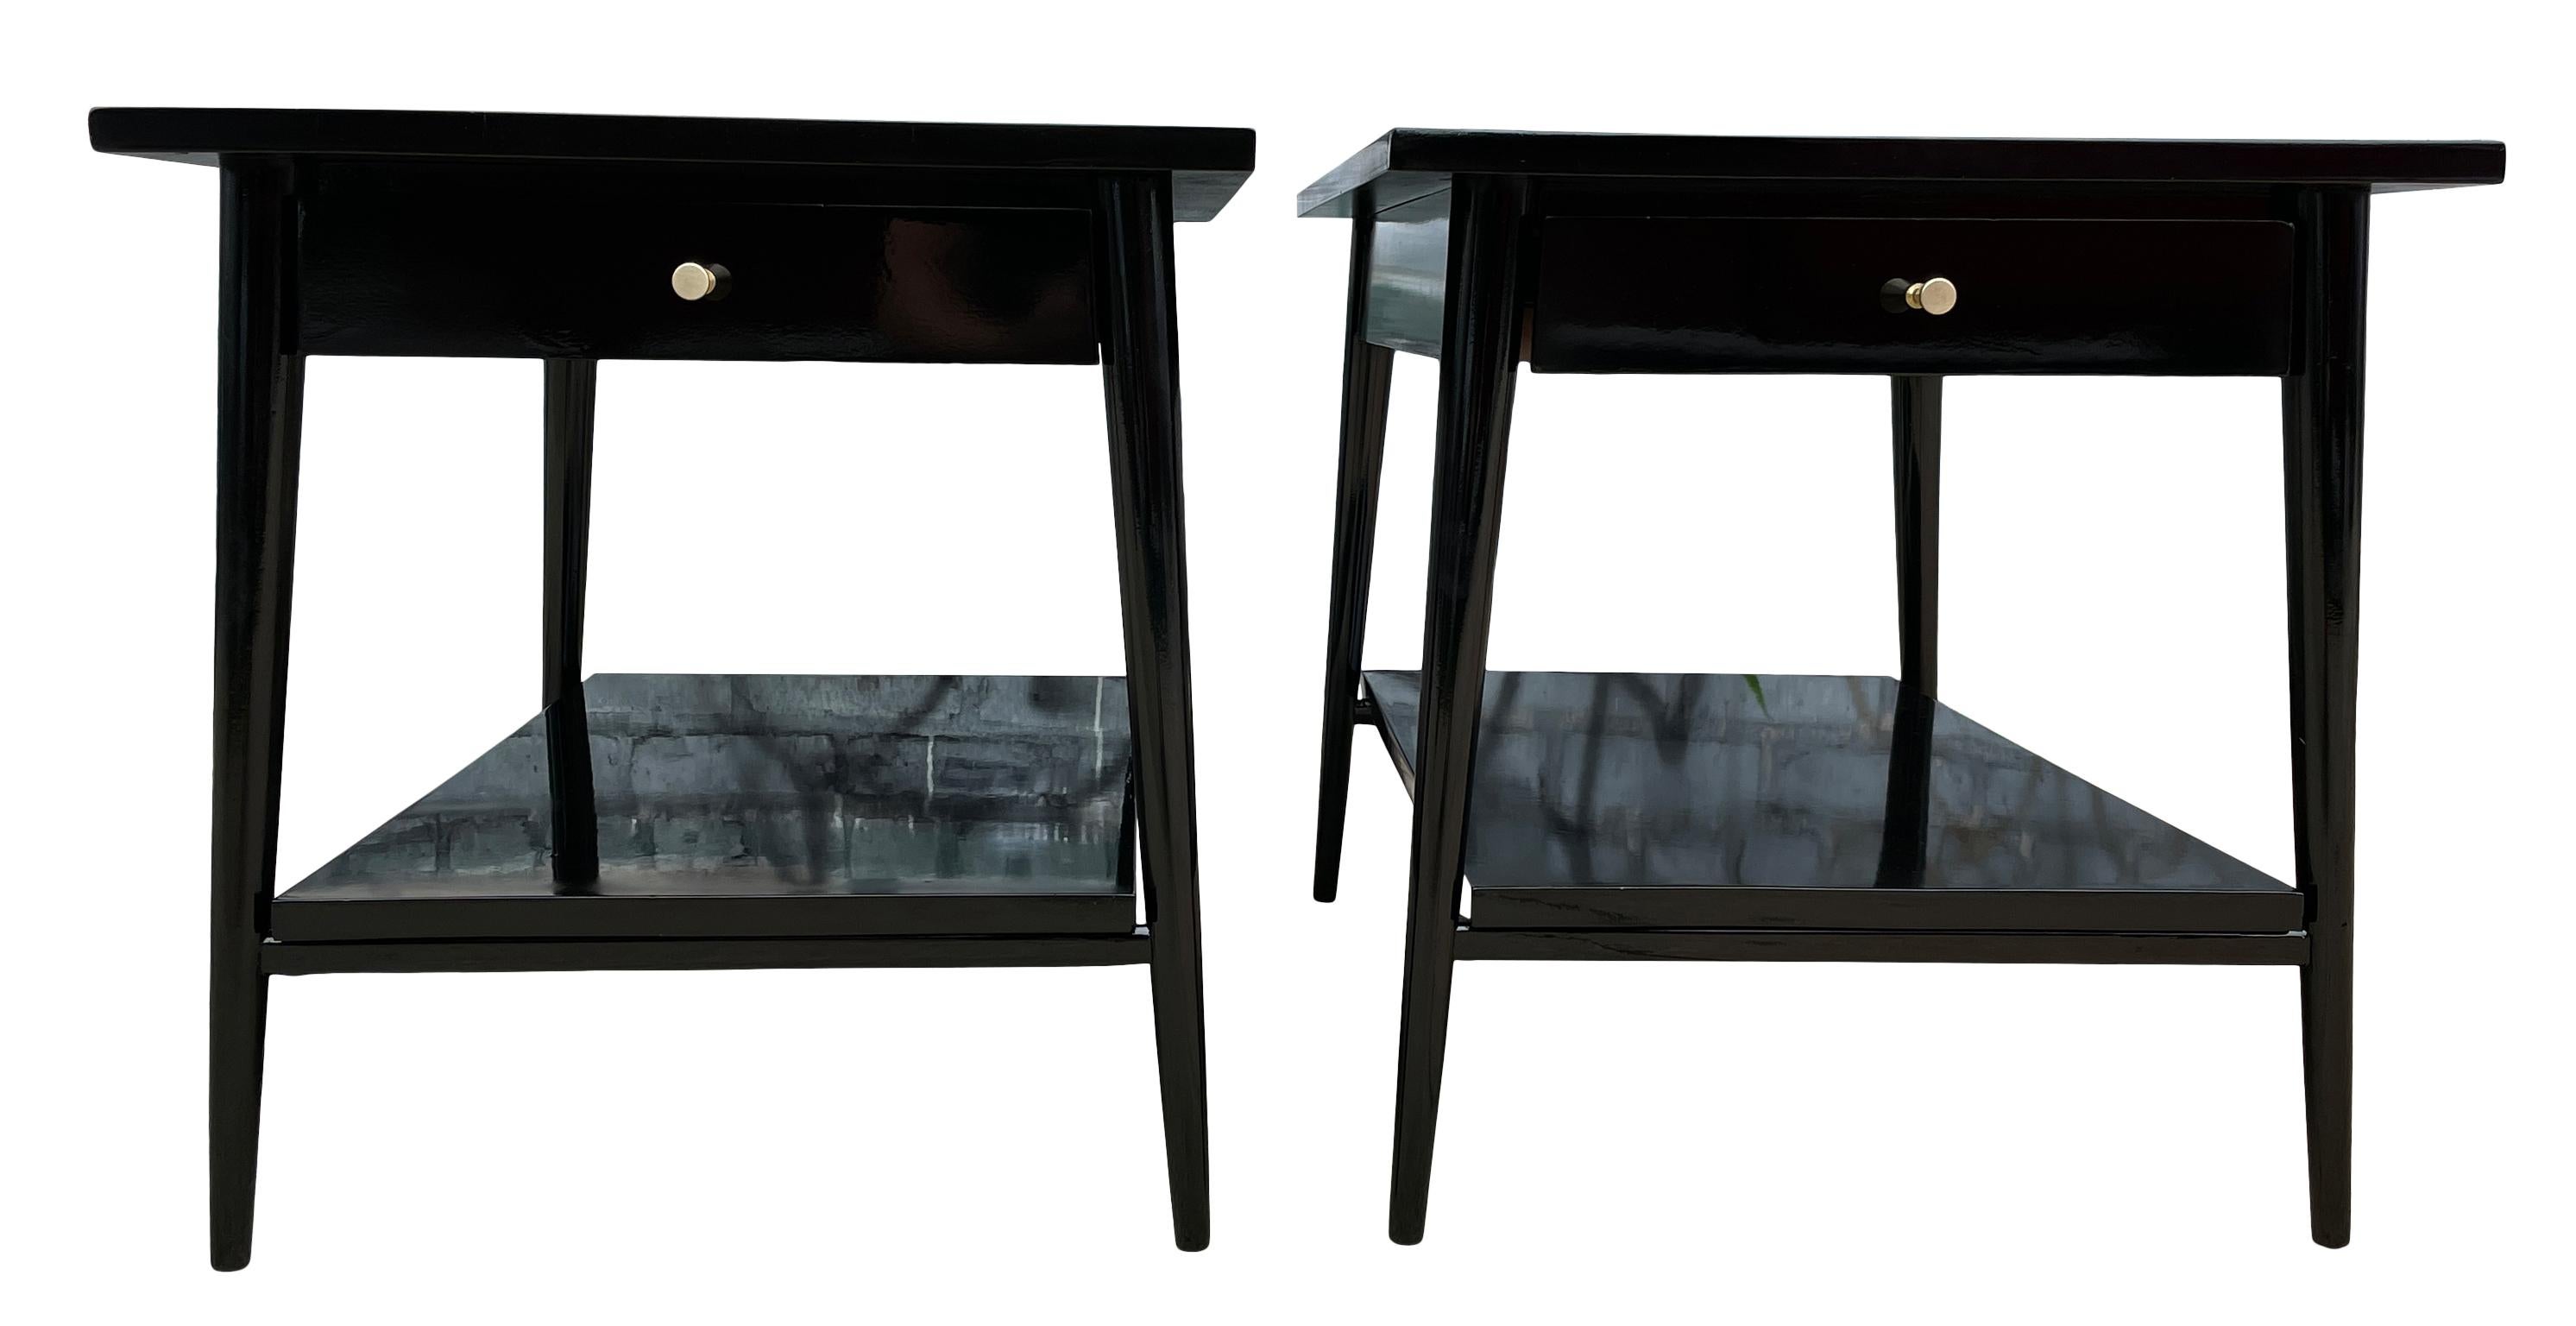 Beautiful pair of Paul McCobb Planner Group #1587 maple low nightstands lamp end sofa tables single drawer Planner Group Brass knobs in original gloss black lacquer finish. Refinished at one point in time - great vintage condition. Very delicate